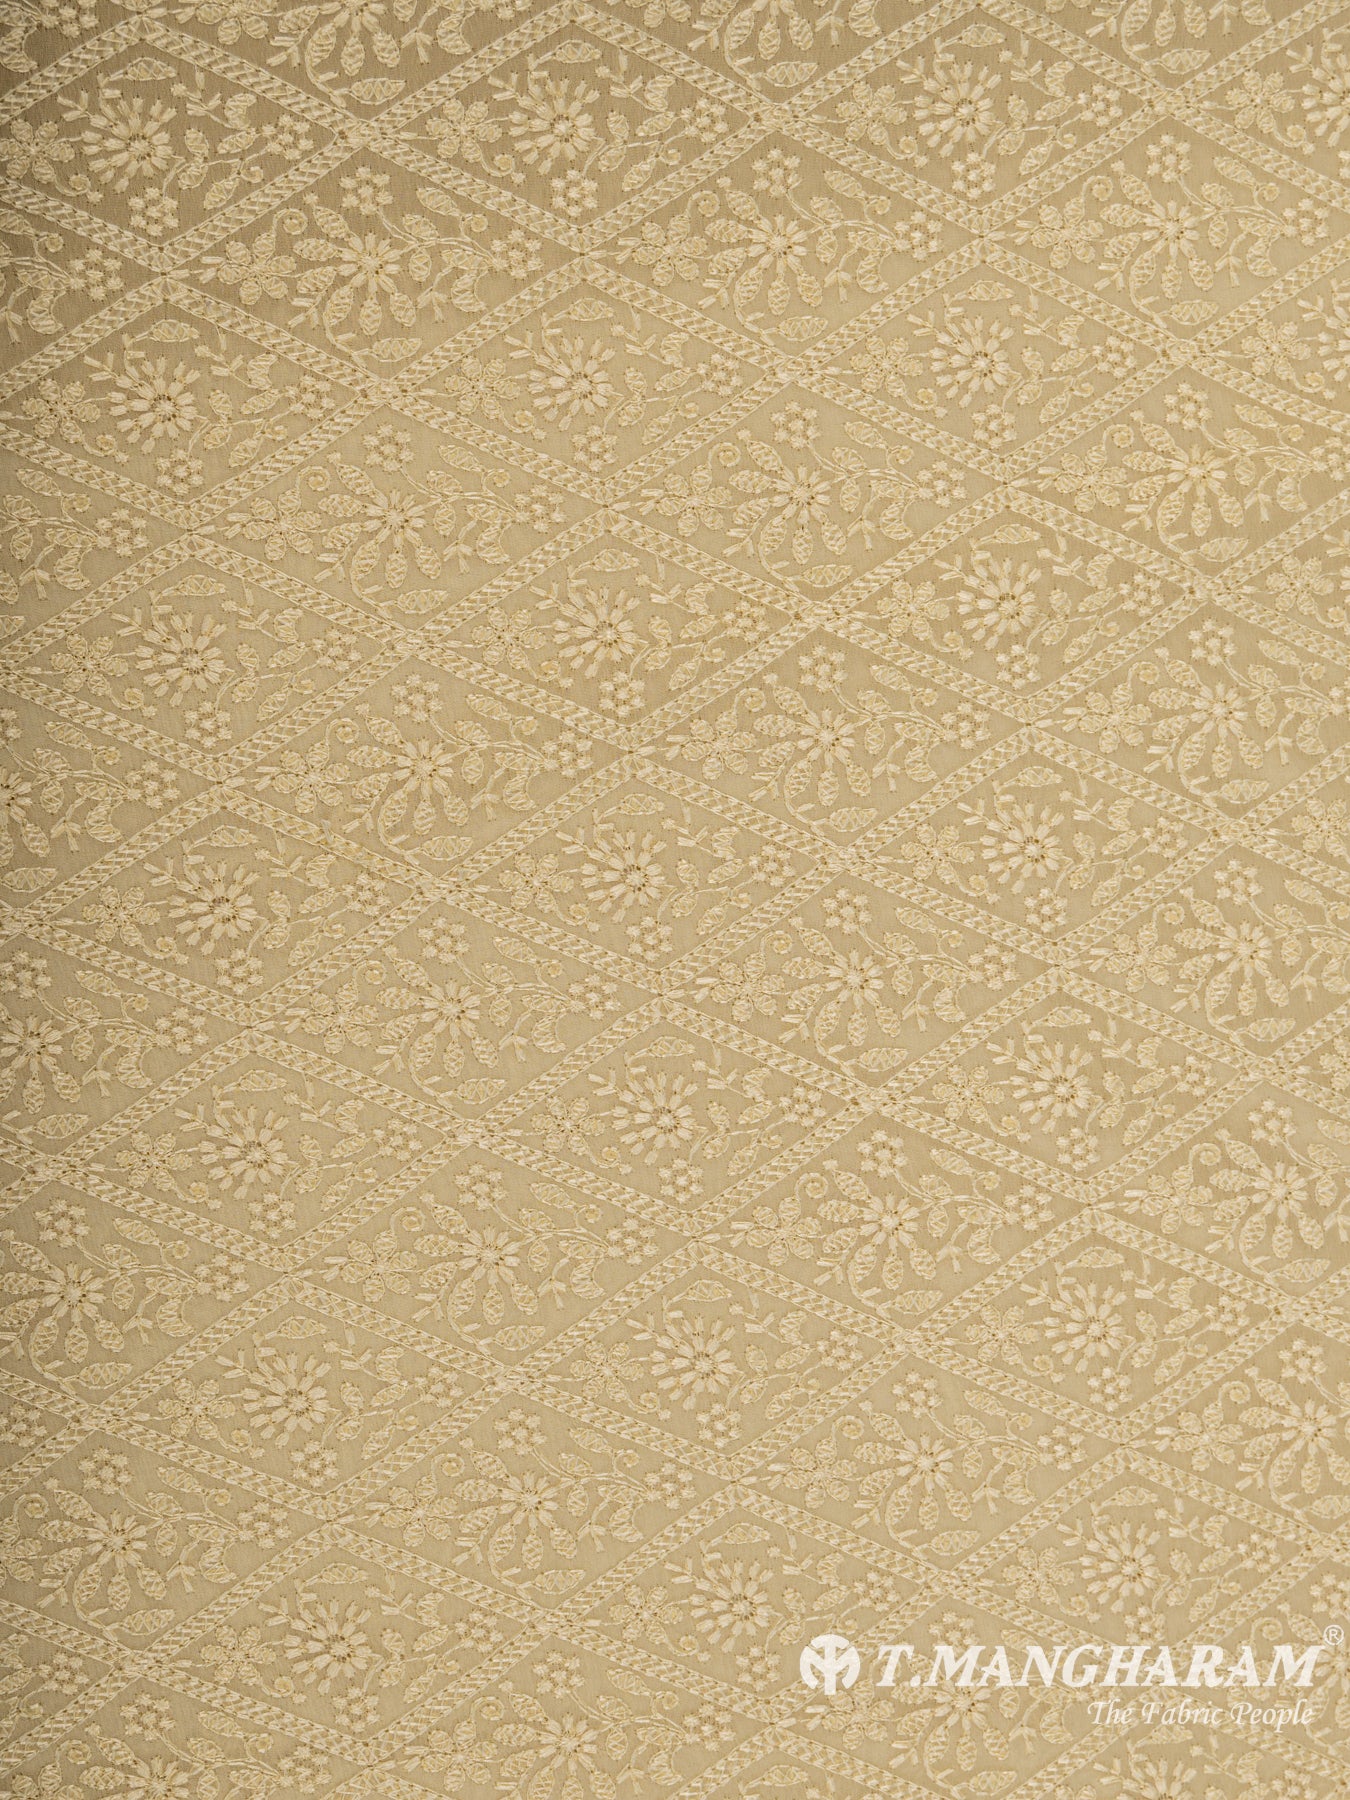 Yellow Georgette Embroidery Fabric - EC6536 view-3